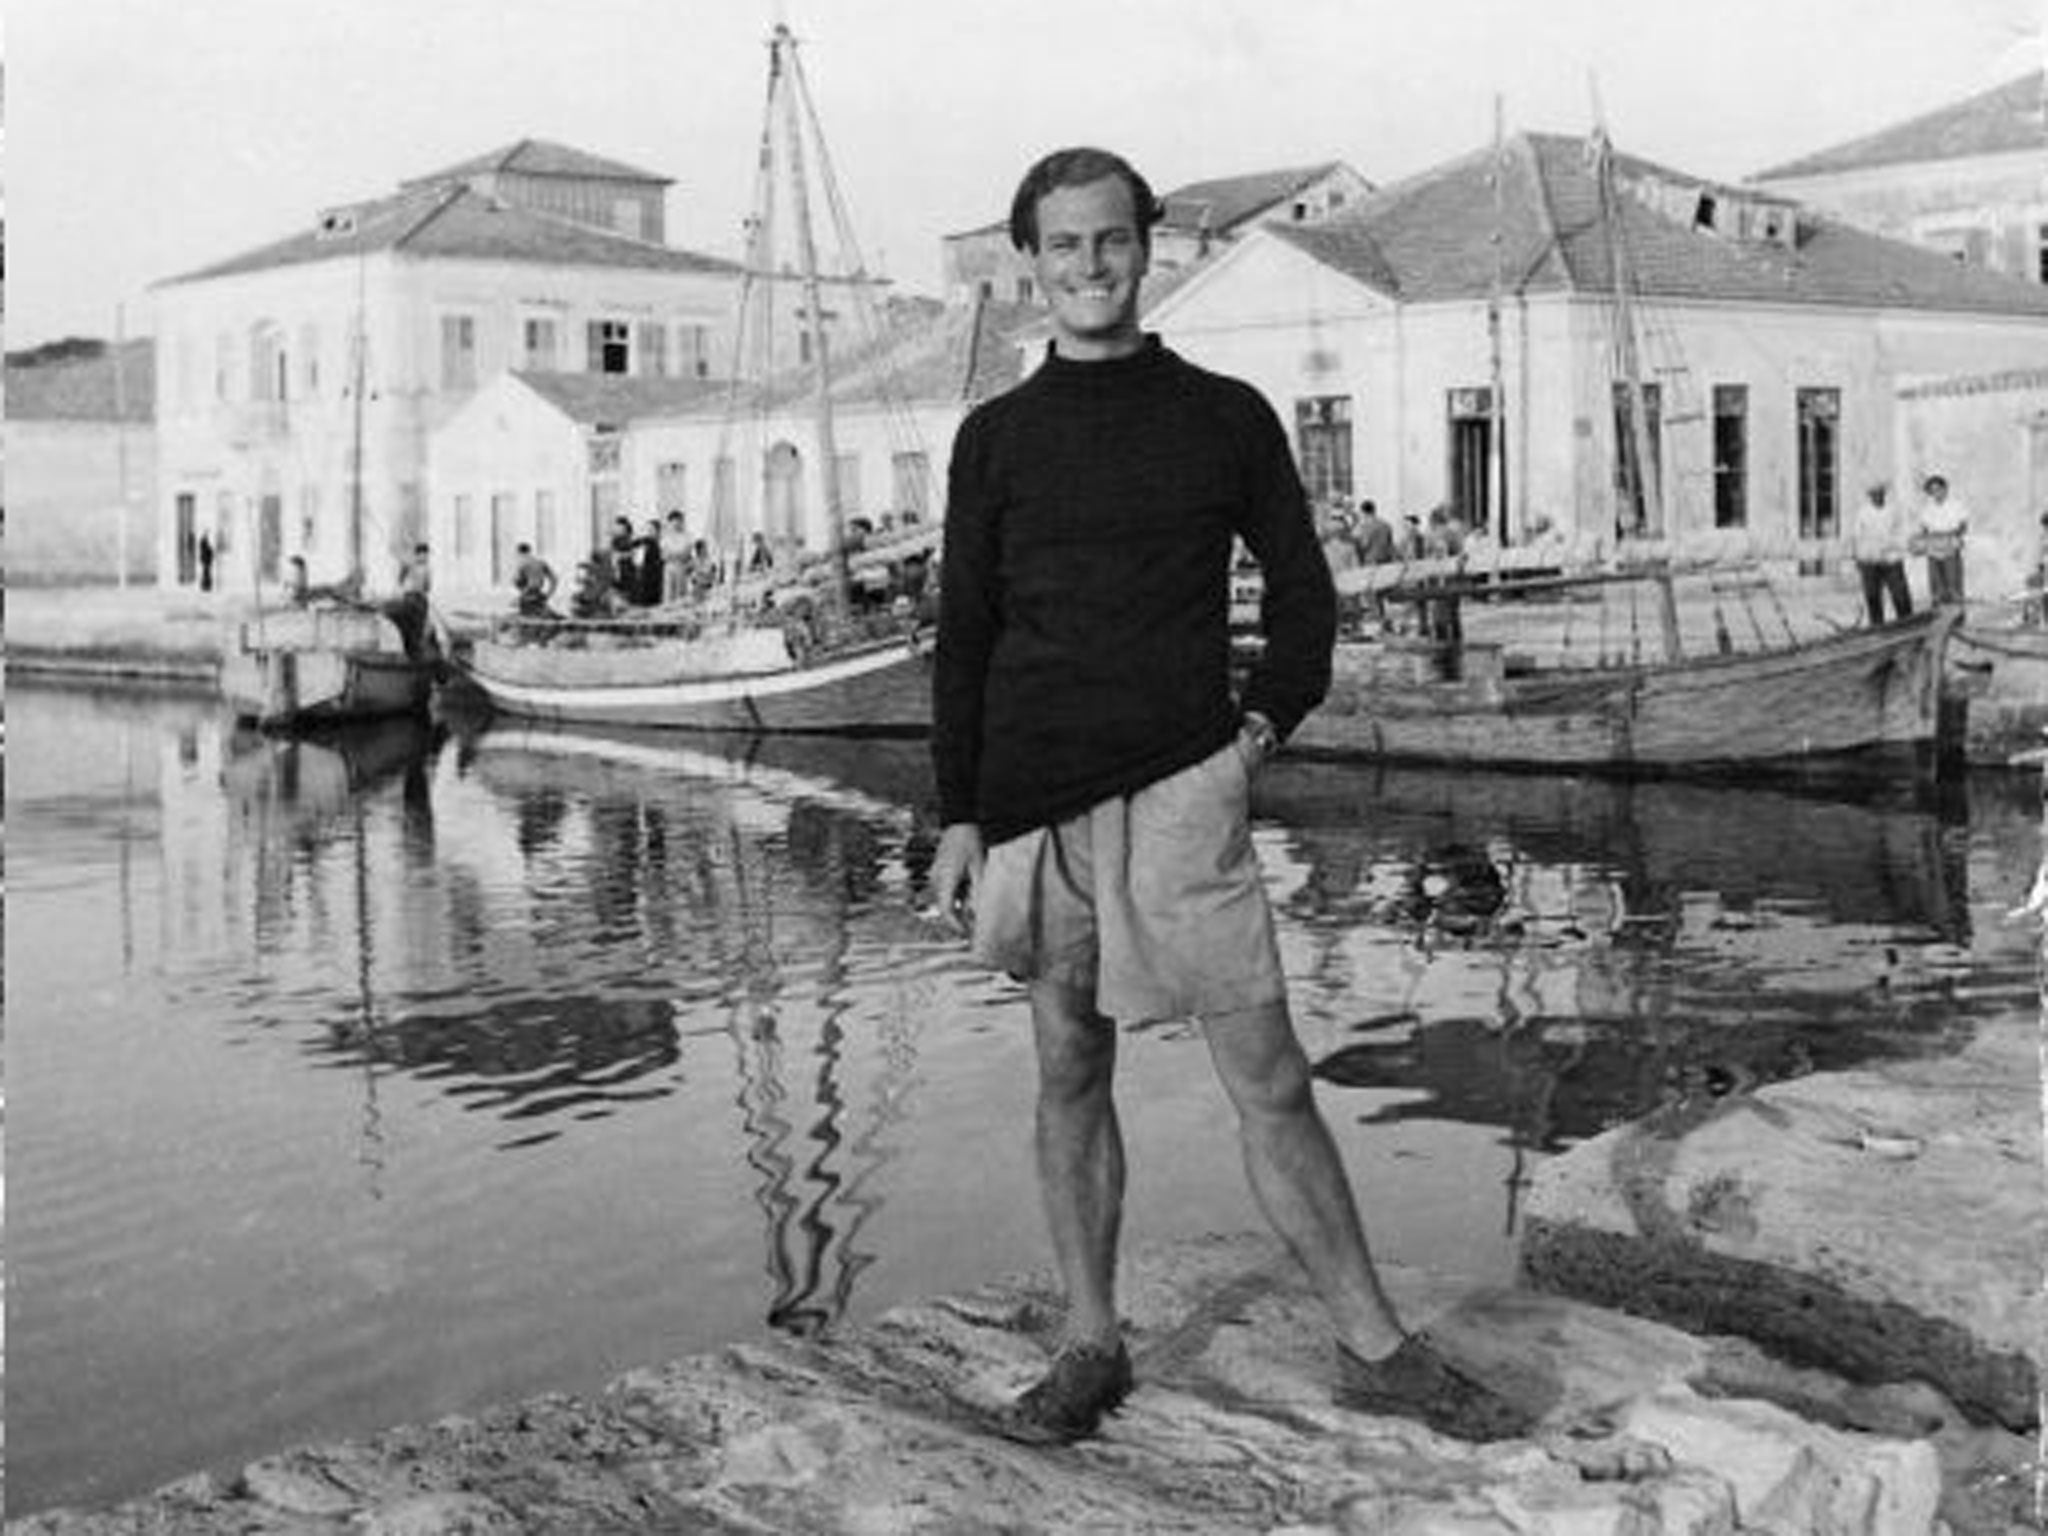 A writer remembered: Patrick Leigh Fermor at Ithaca